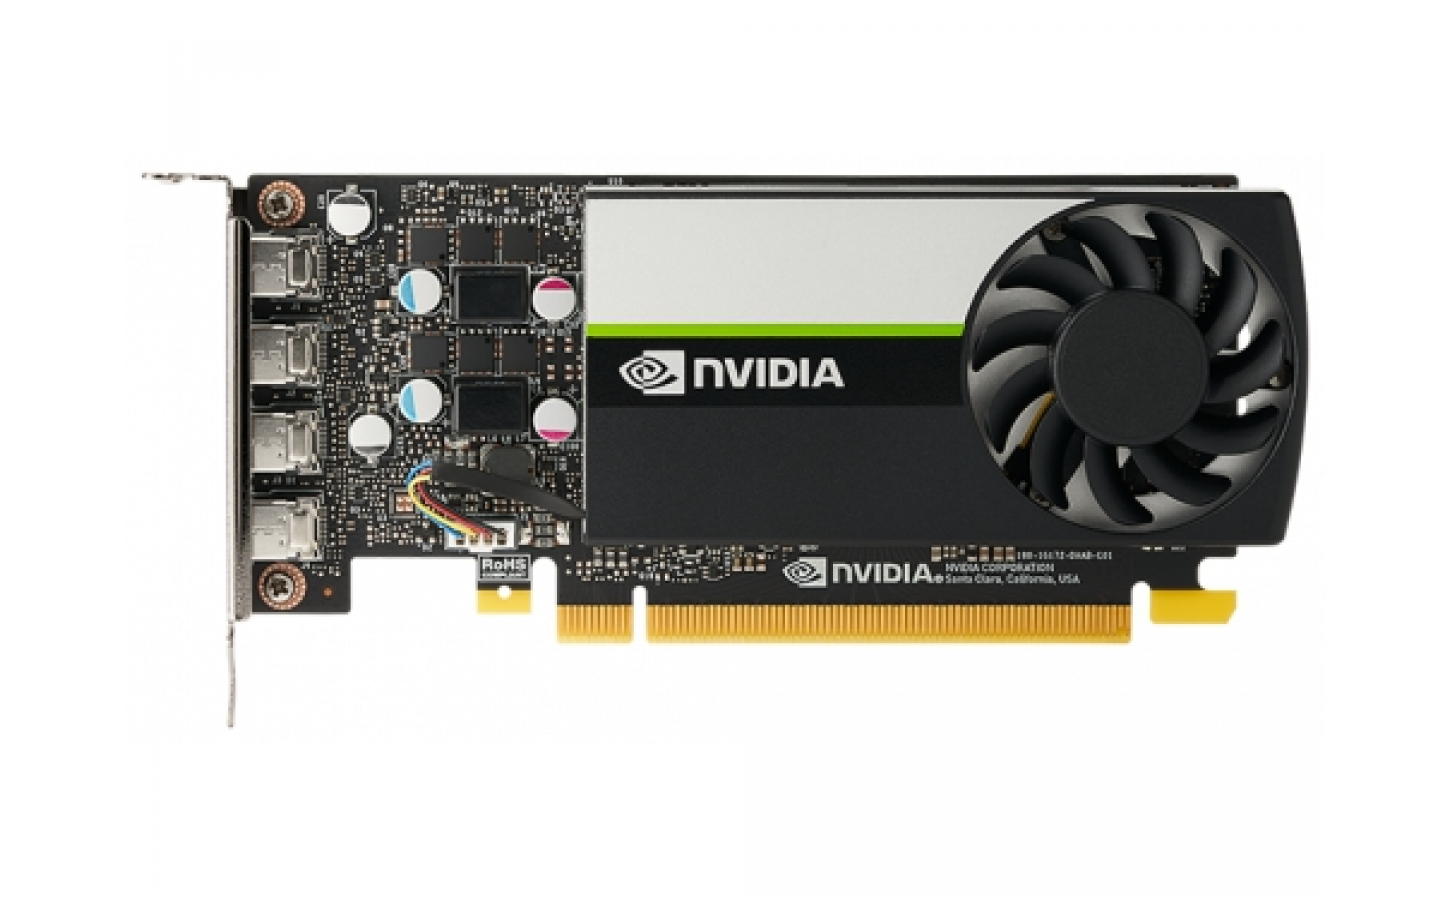 Indulge in High-Quality Adult Content with NVIDIA T1000's Superior Graphics